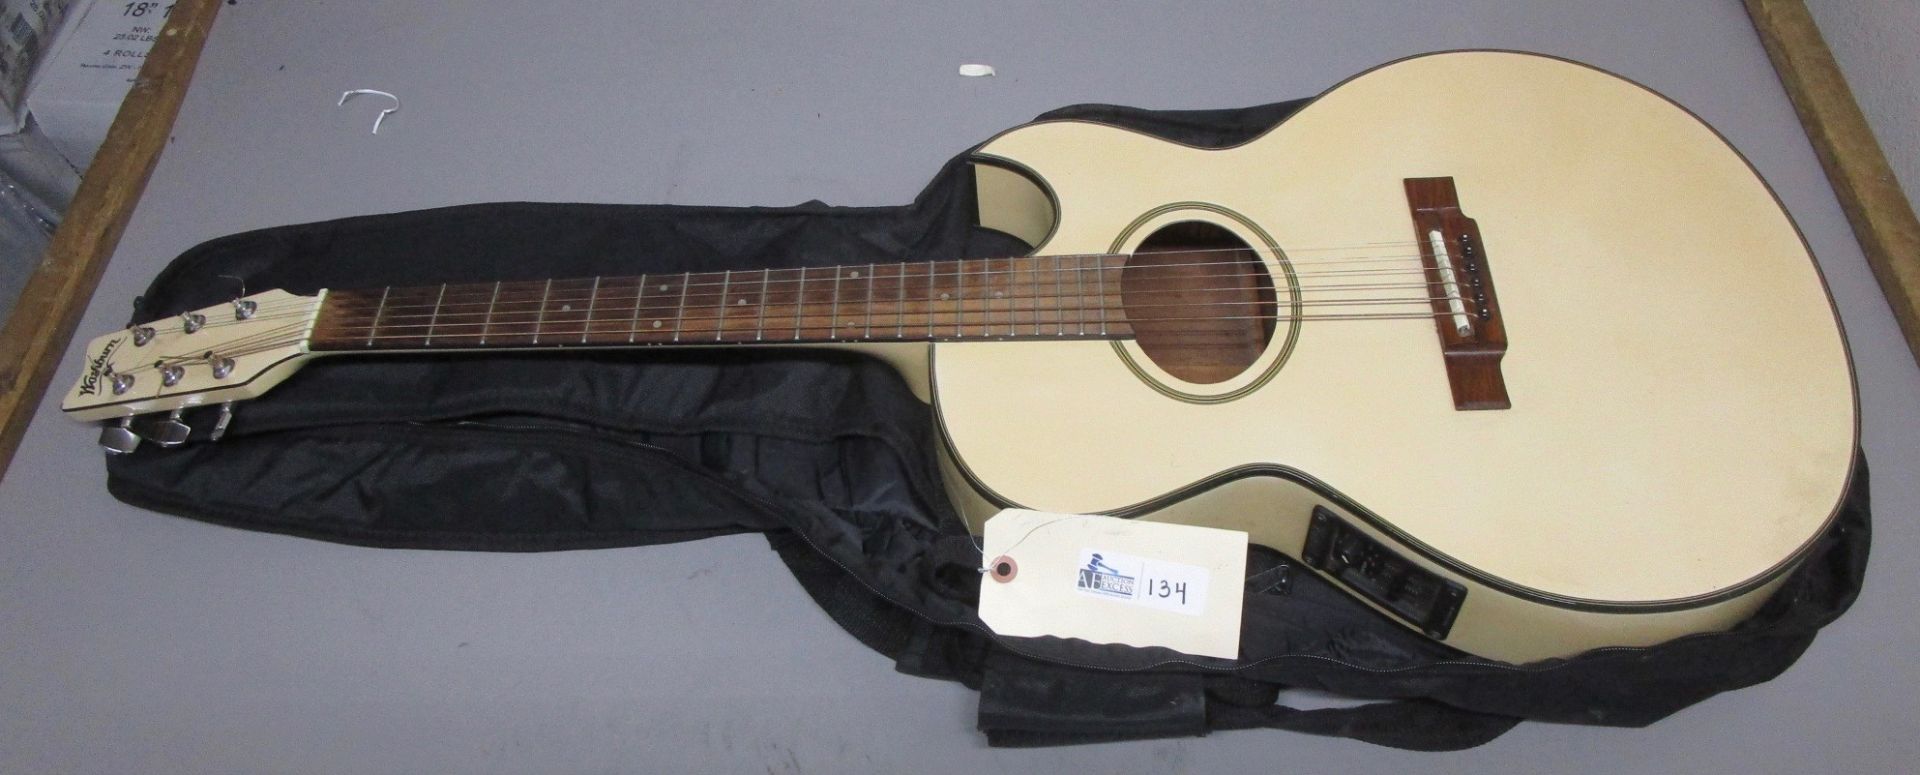 WASHBURN EQUIS II MODEL EA 20WH FESTIVAL SERIES ACOUSTIC/ELECTRIC GUITAR WITH CASE - Image 2 of 9